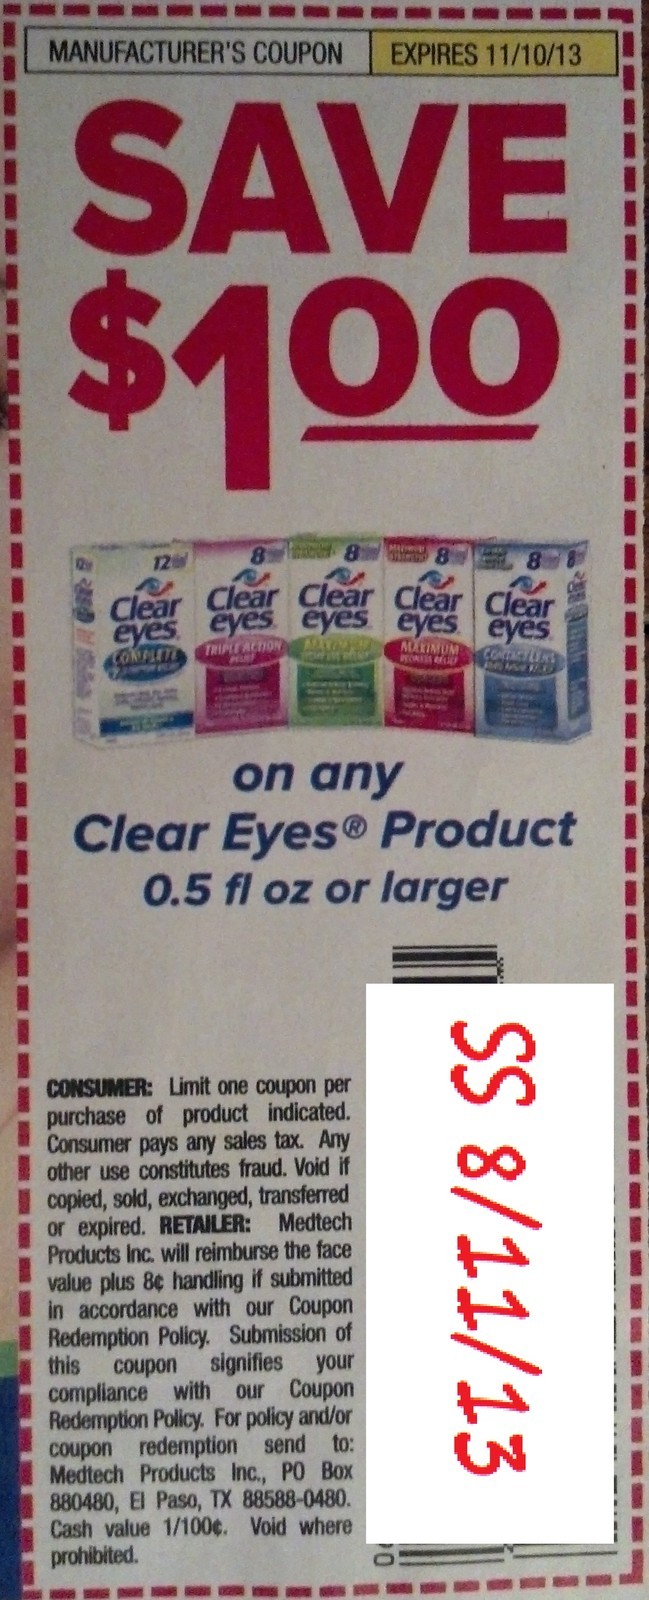 Save $1.00 on any Clear Eyes product 0.5 fl oz or larger Expires 11/10/2013